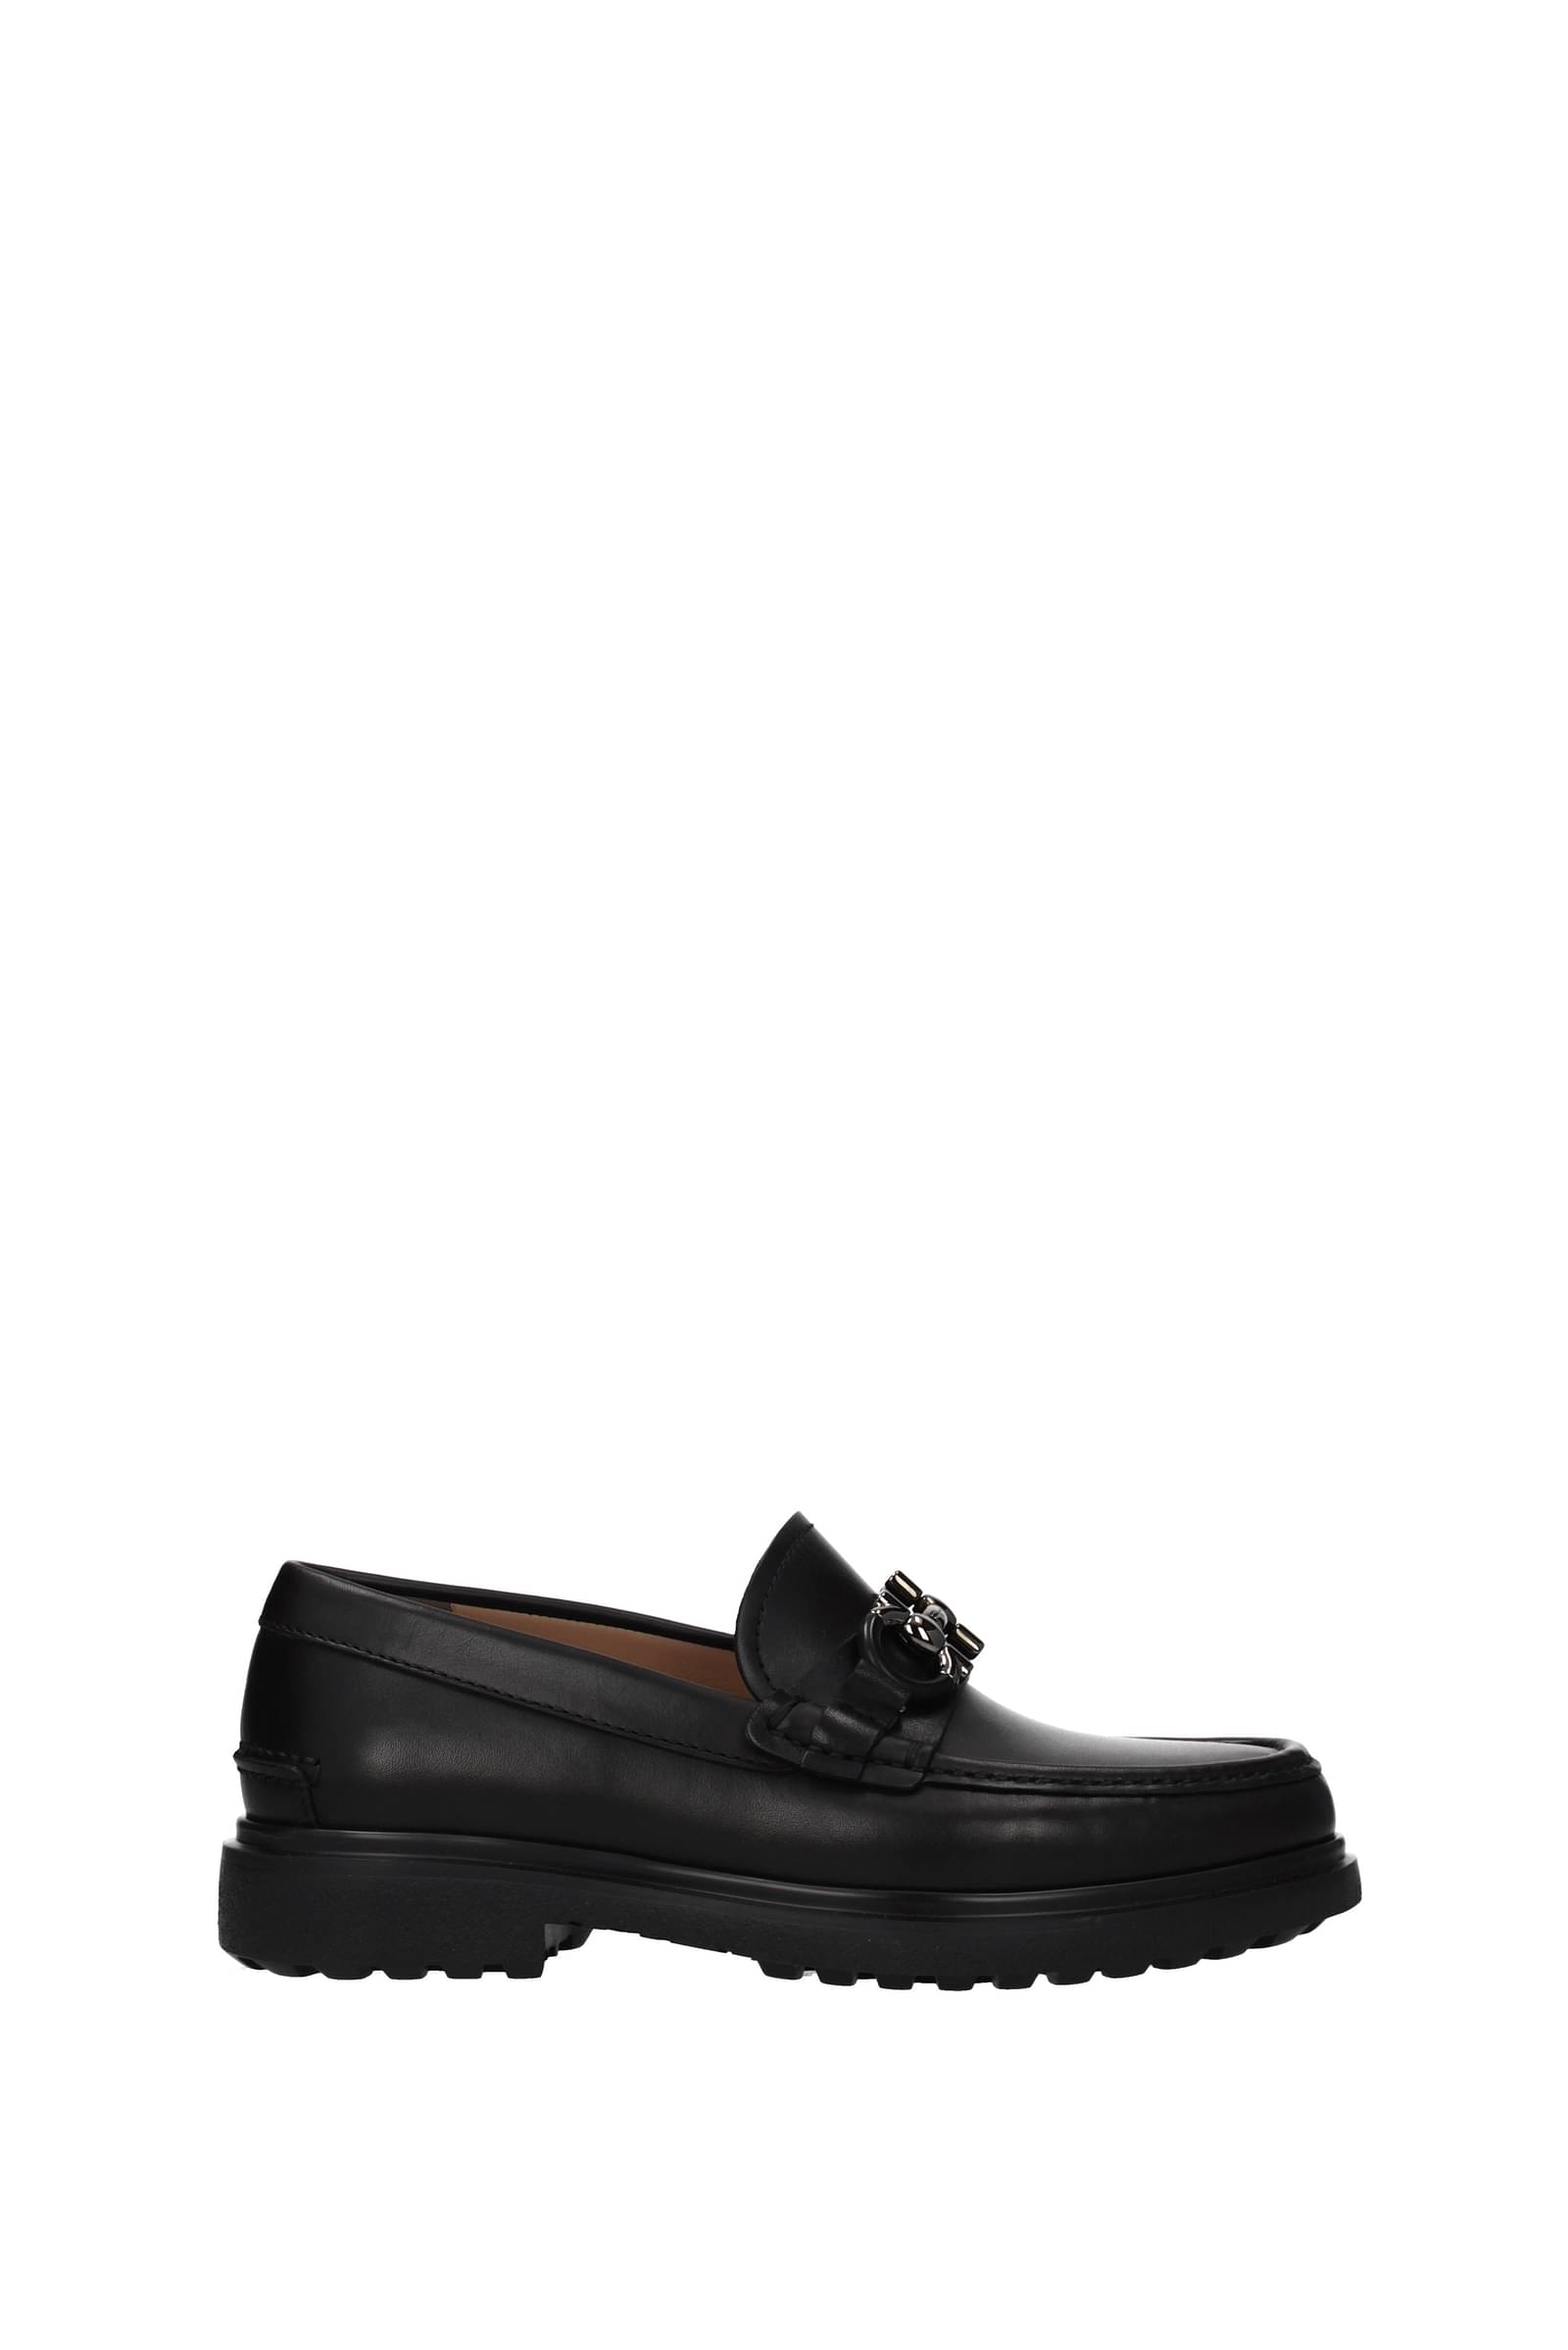 FERRAGAMO PENNY LOAFER SHOES – Enzo Clothing Store